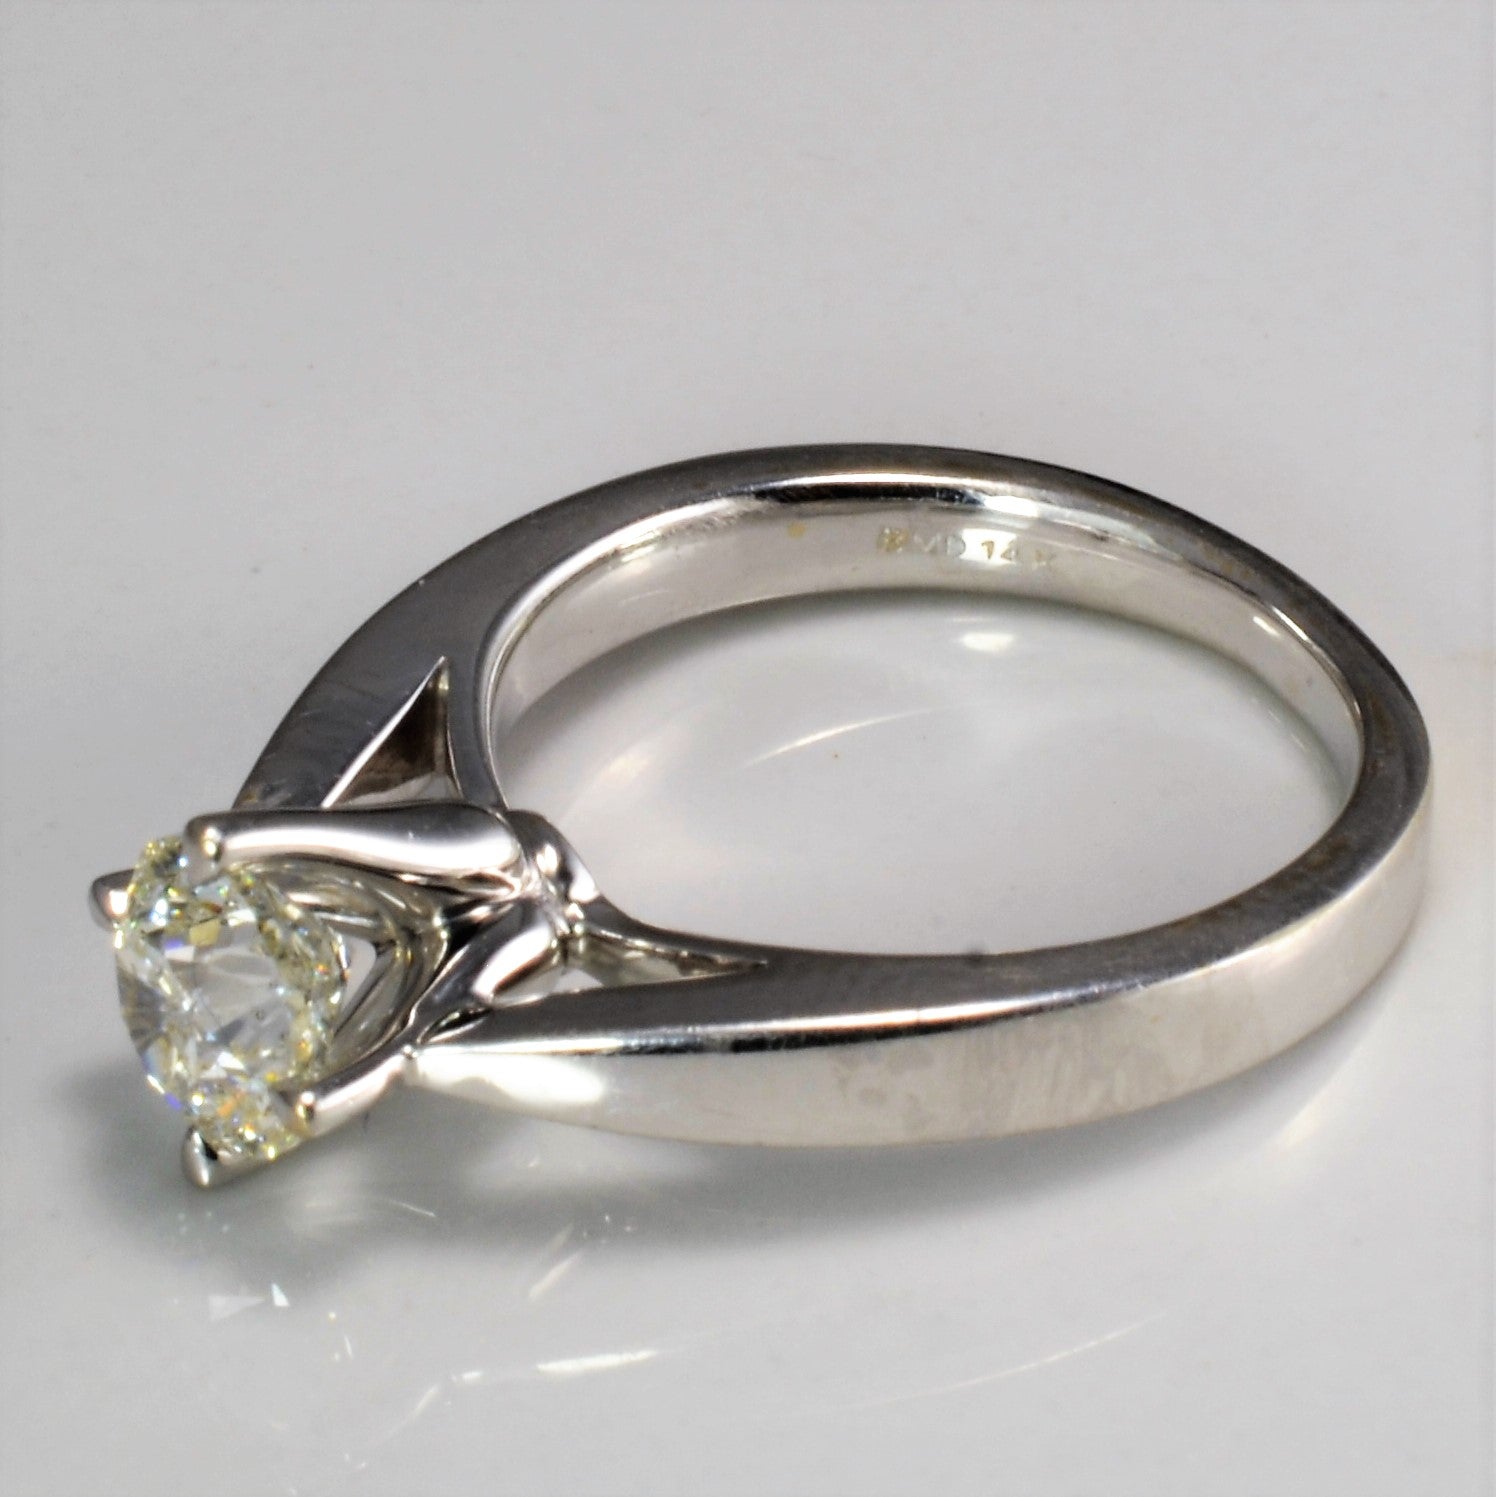 East West Solitaire Canadian Diamond Engagement Ring | 1.00 ct | SI1, H | SZ 5.5 |